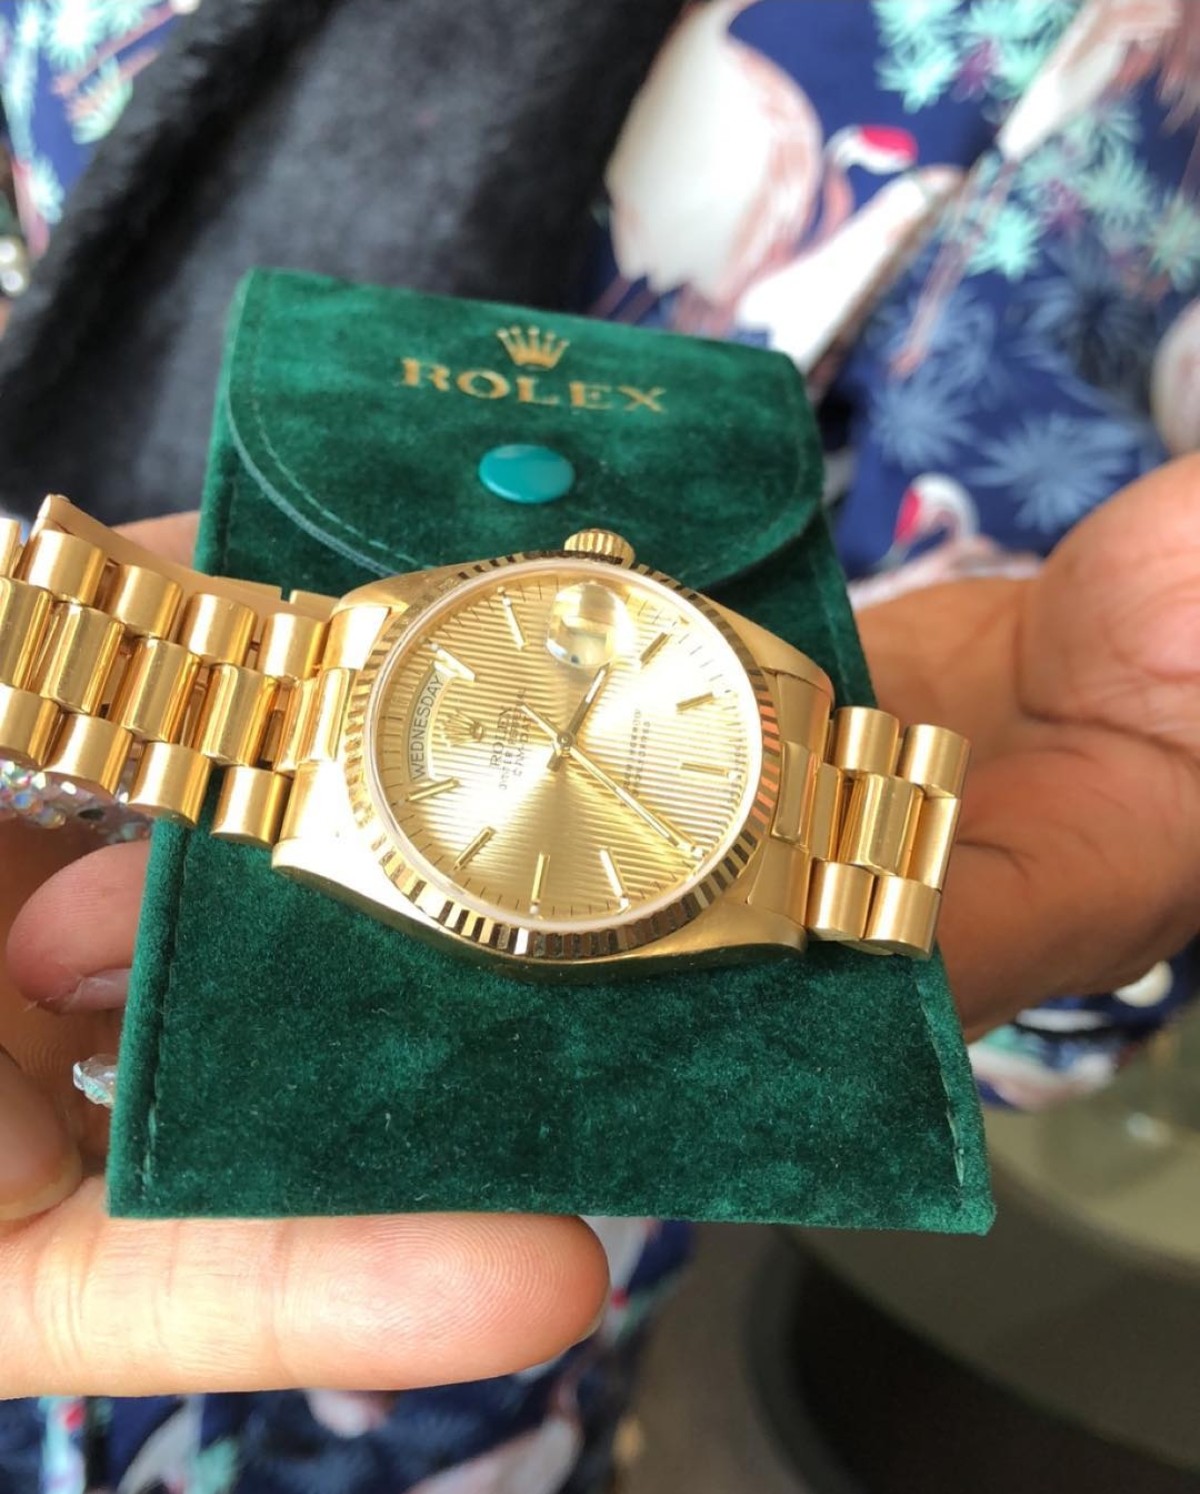 Bobrisky Gets A Rolex As Gift From His Bae (2)